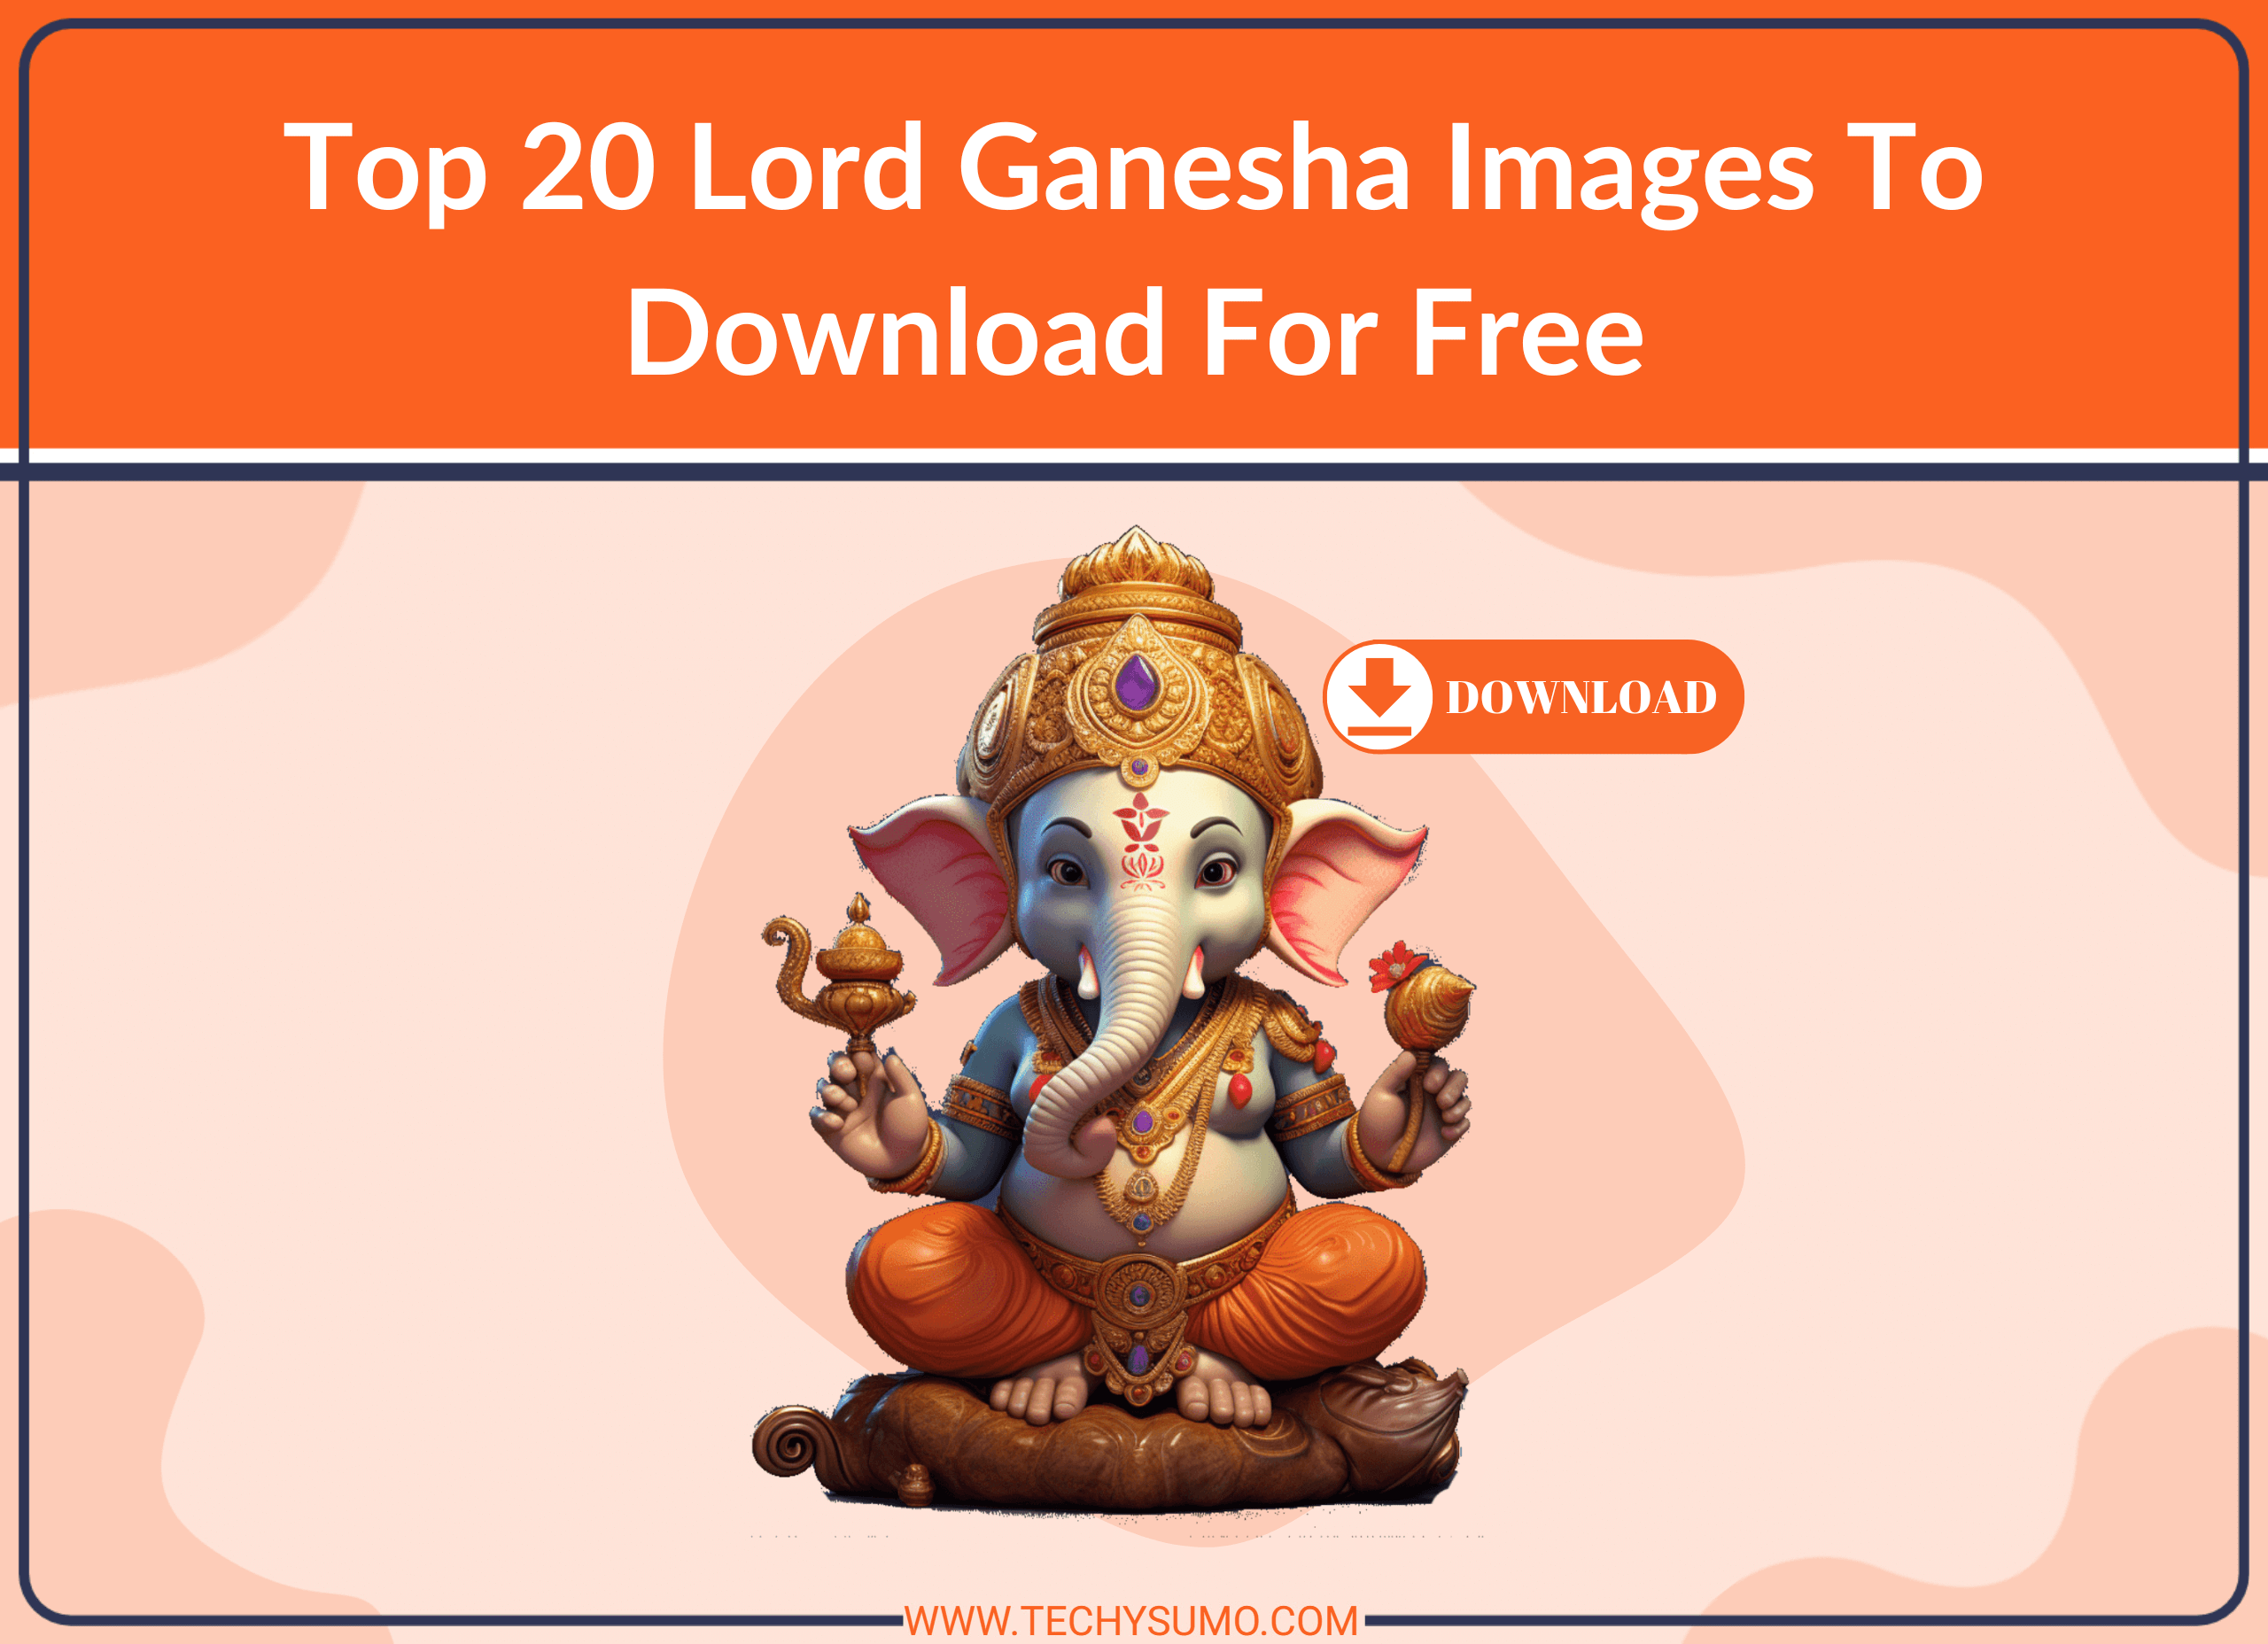 Top 20 Lord Ganesha Images To Download For Free